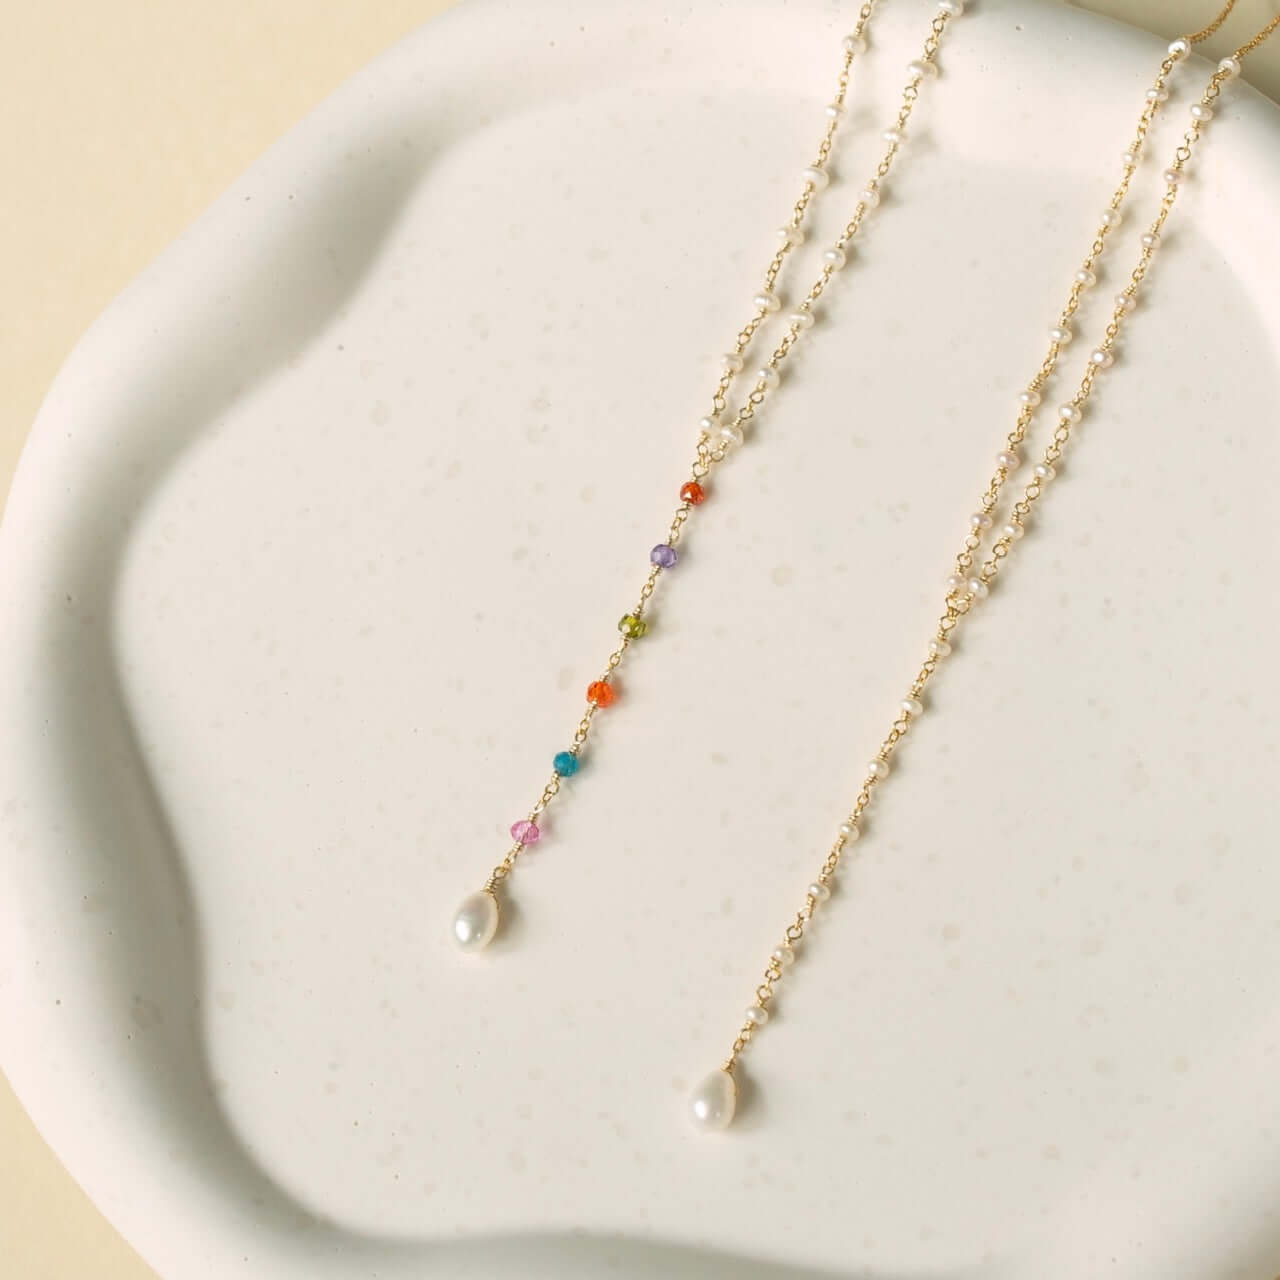 Timeless pearls and a playful pearl pendant with vibrant charms—two stylish necklaces.